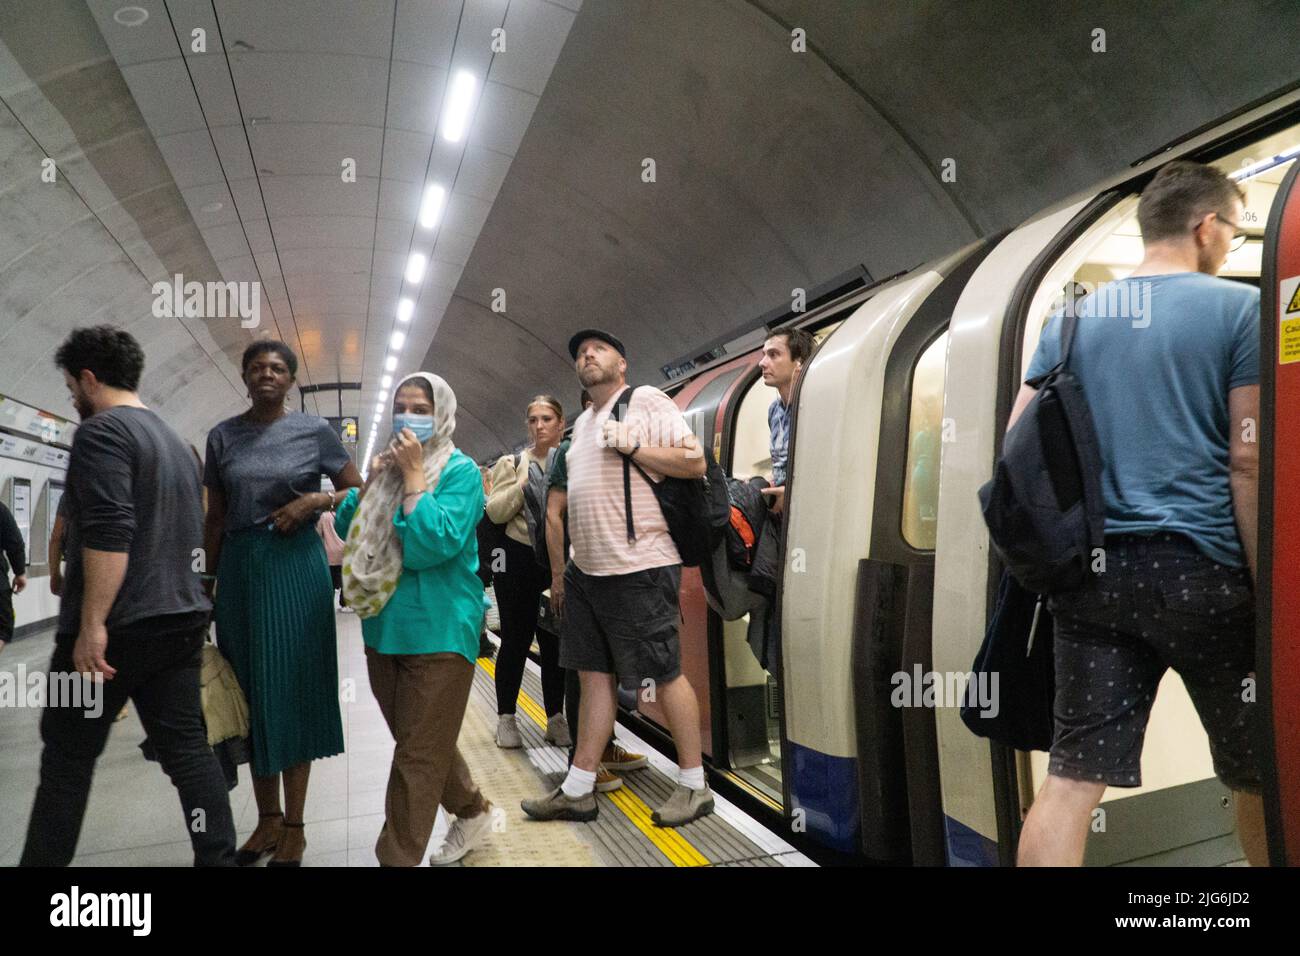 London, UK, 7 July 2022: Covid cases are rising dramatically at the moment, particularly the new BA.4 and BA.5 variants of omicron. With no official advice to wear face masks in crowded spaces most London commuters on the tube remain mask-free. Anna Watson/Alamy Live News Stock Photo